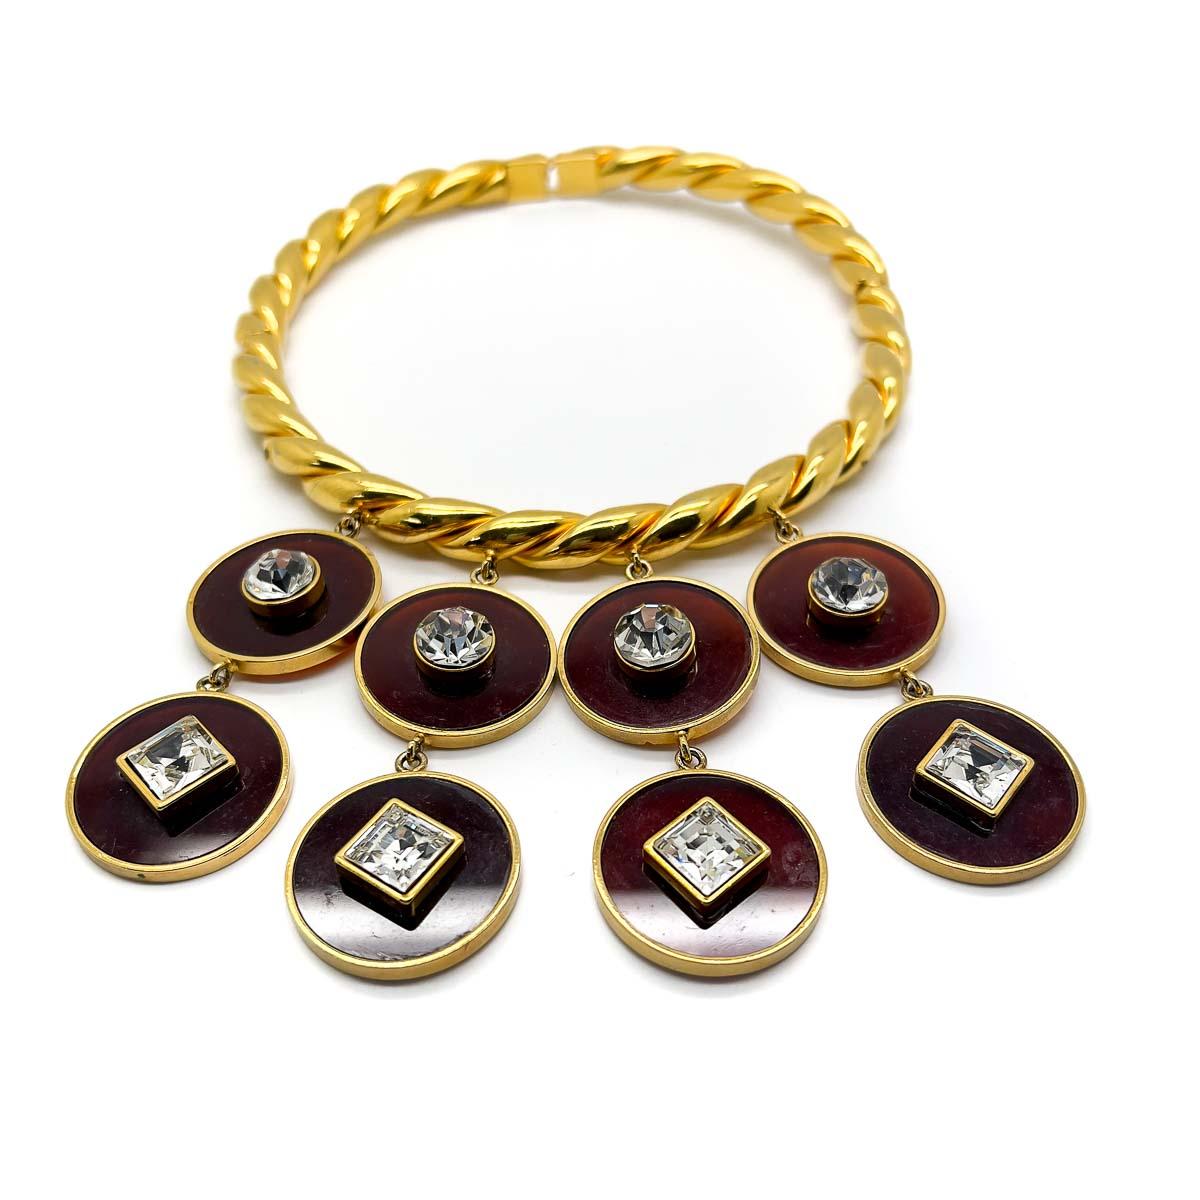 An incredible Vintage Gold Tortoiseshell Disc Choker. A superb design featuring a lustrous, fixed twisted gold choker. The choker adorned with four lines of rich brown tortoiseshell resin discs, each set with a fancy cut crystal and cascading to